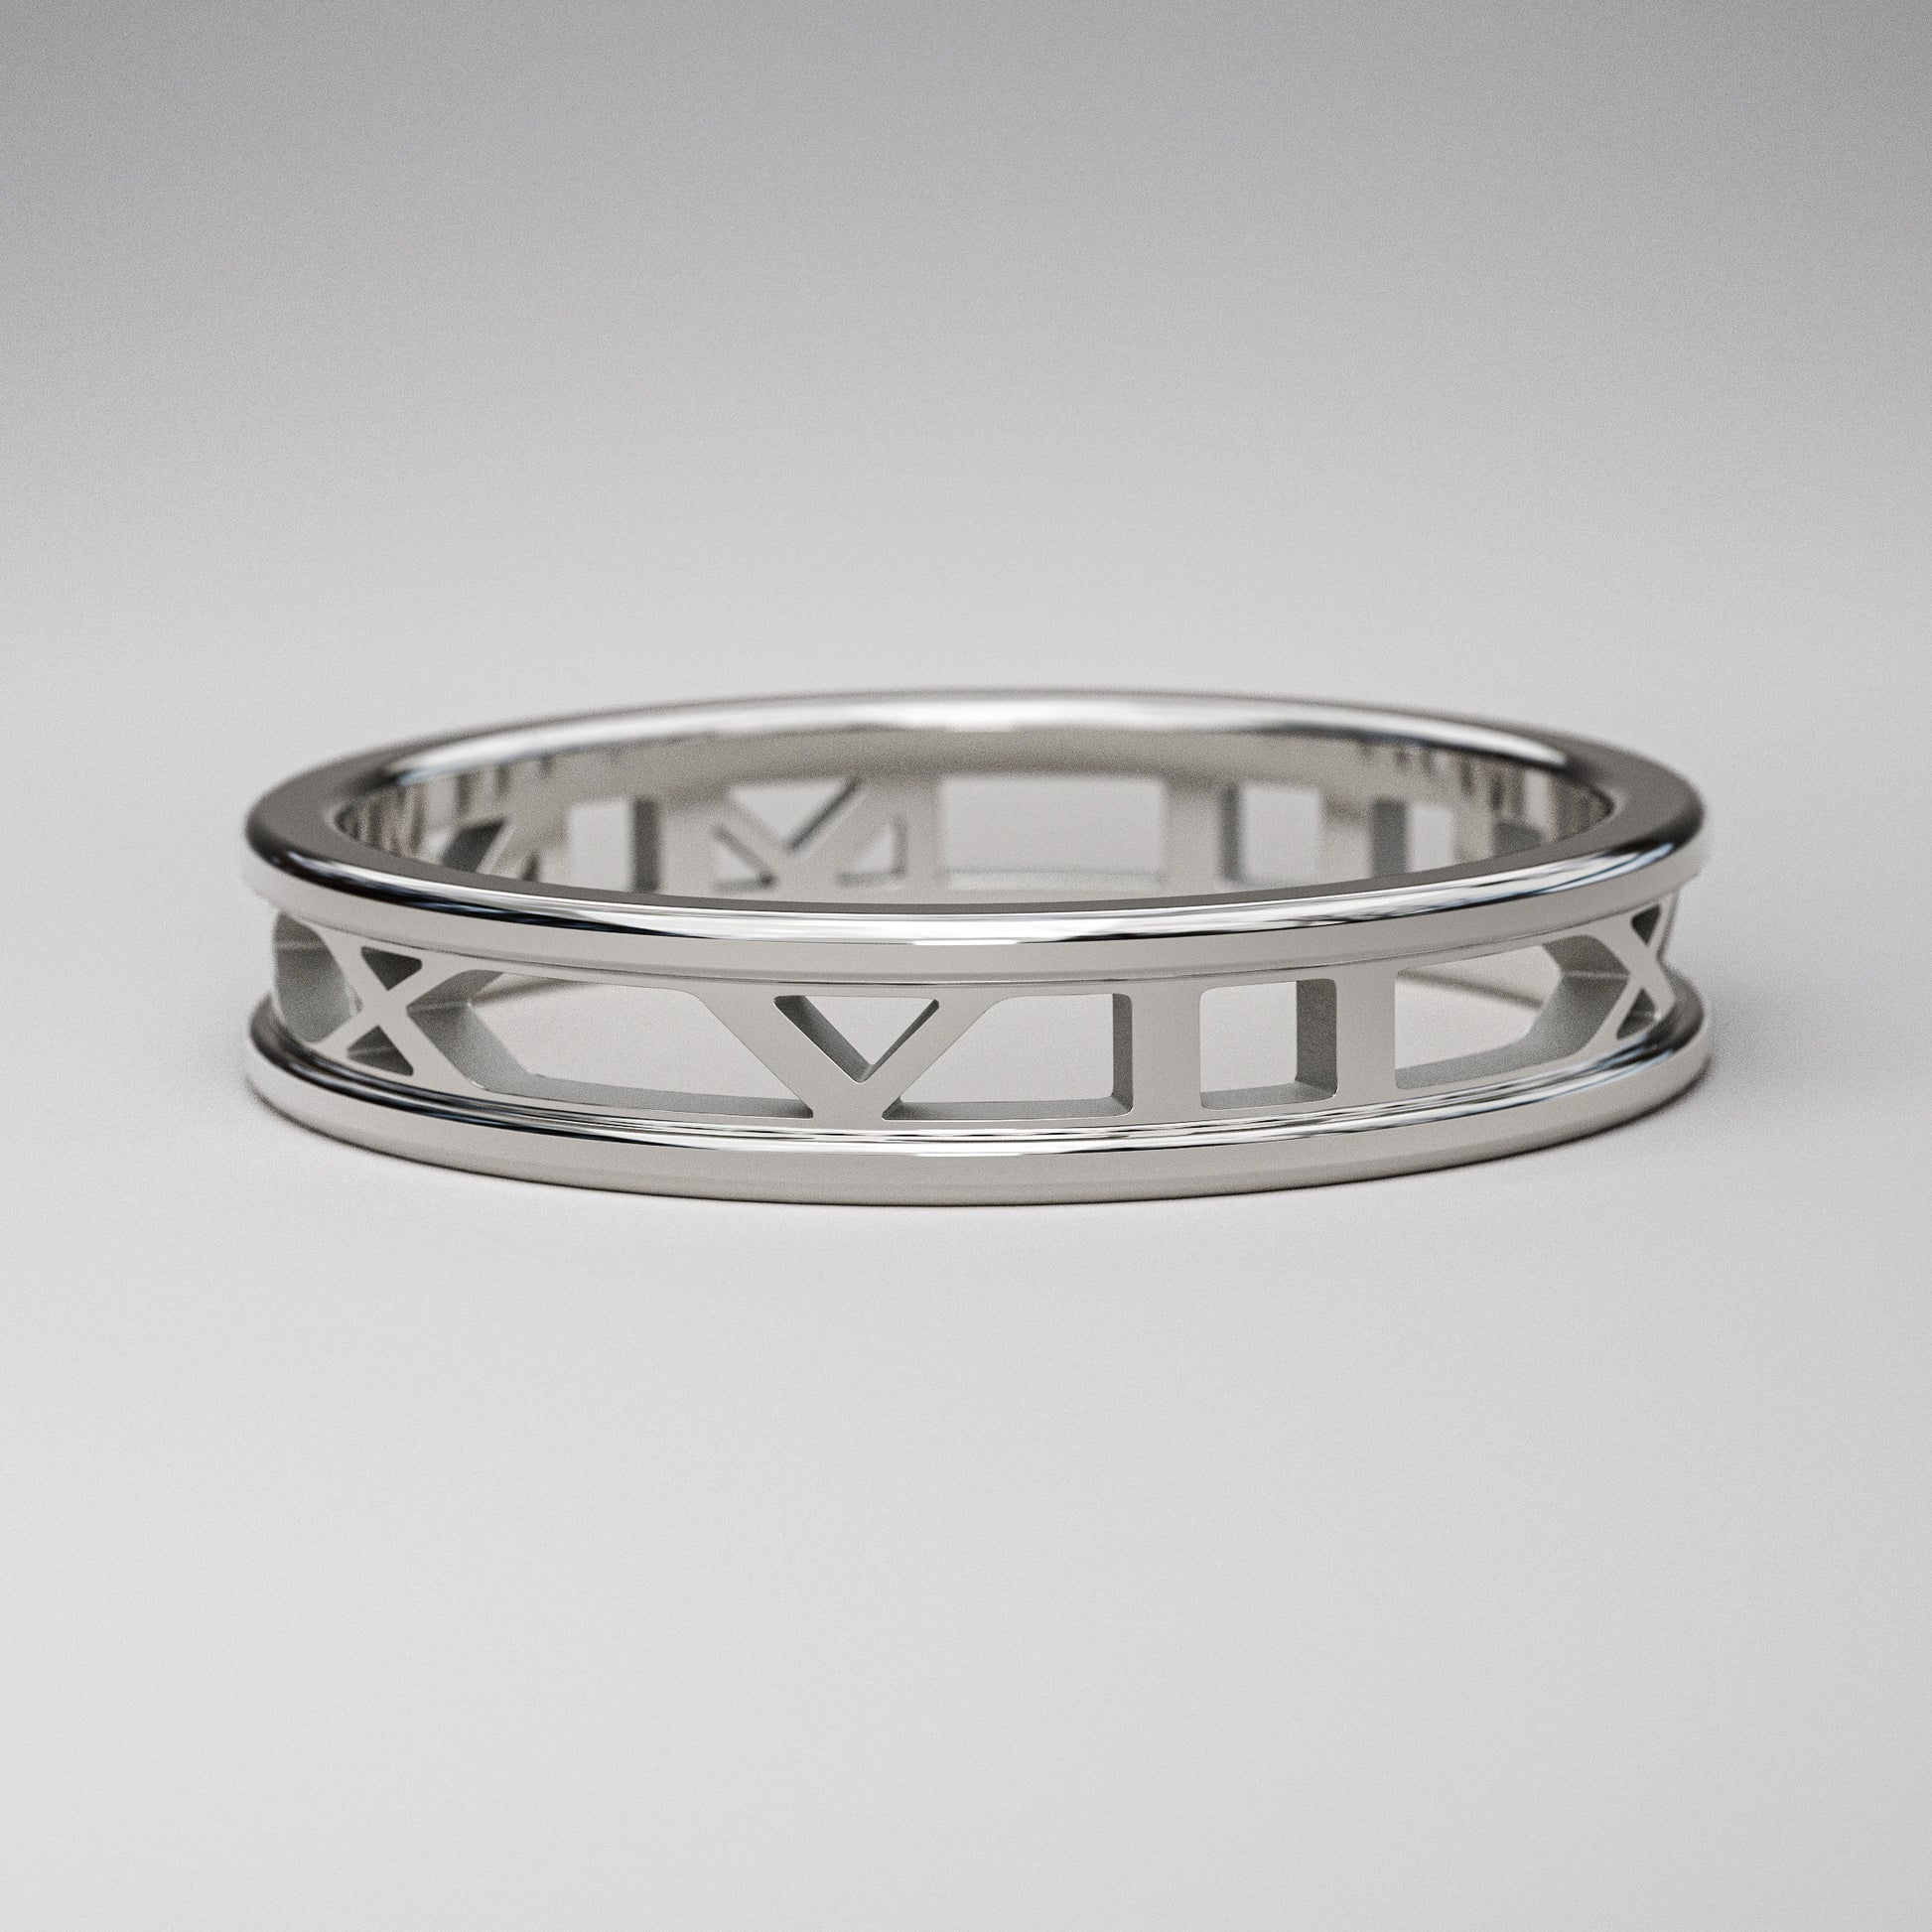 Cut out letters custom date Roman Numeral Ring, in 14k white gold